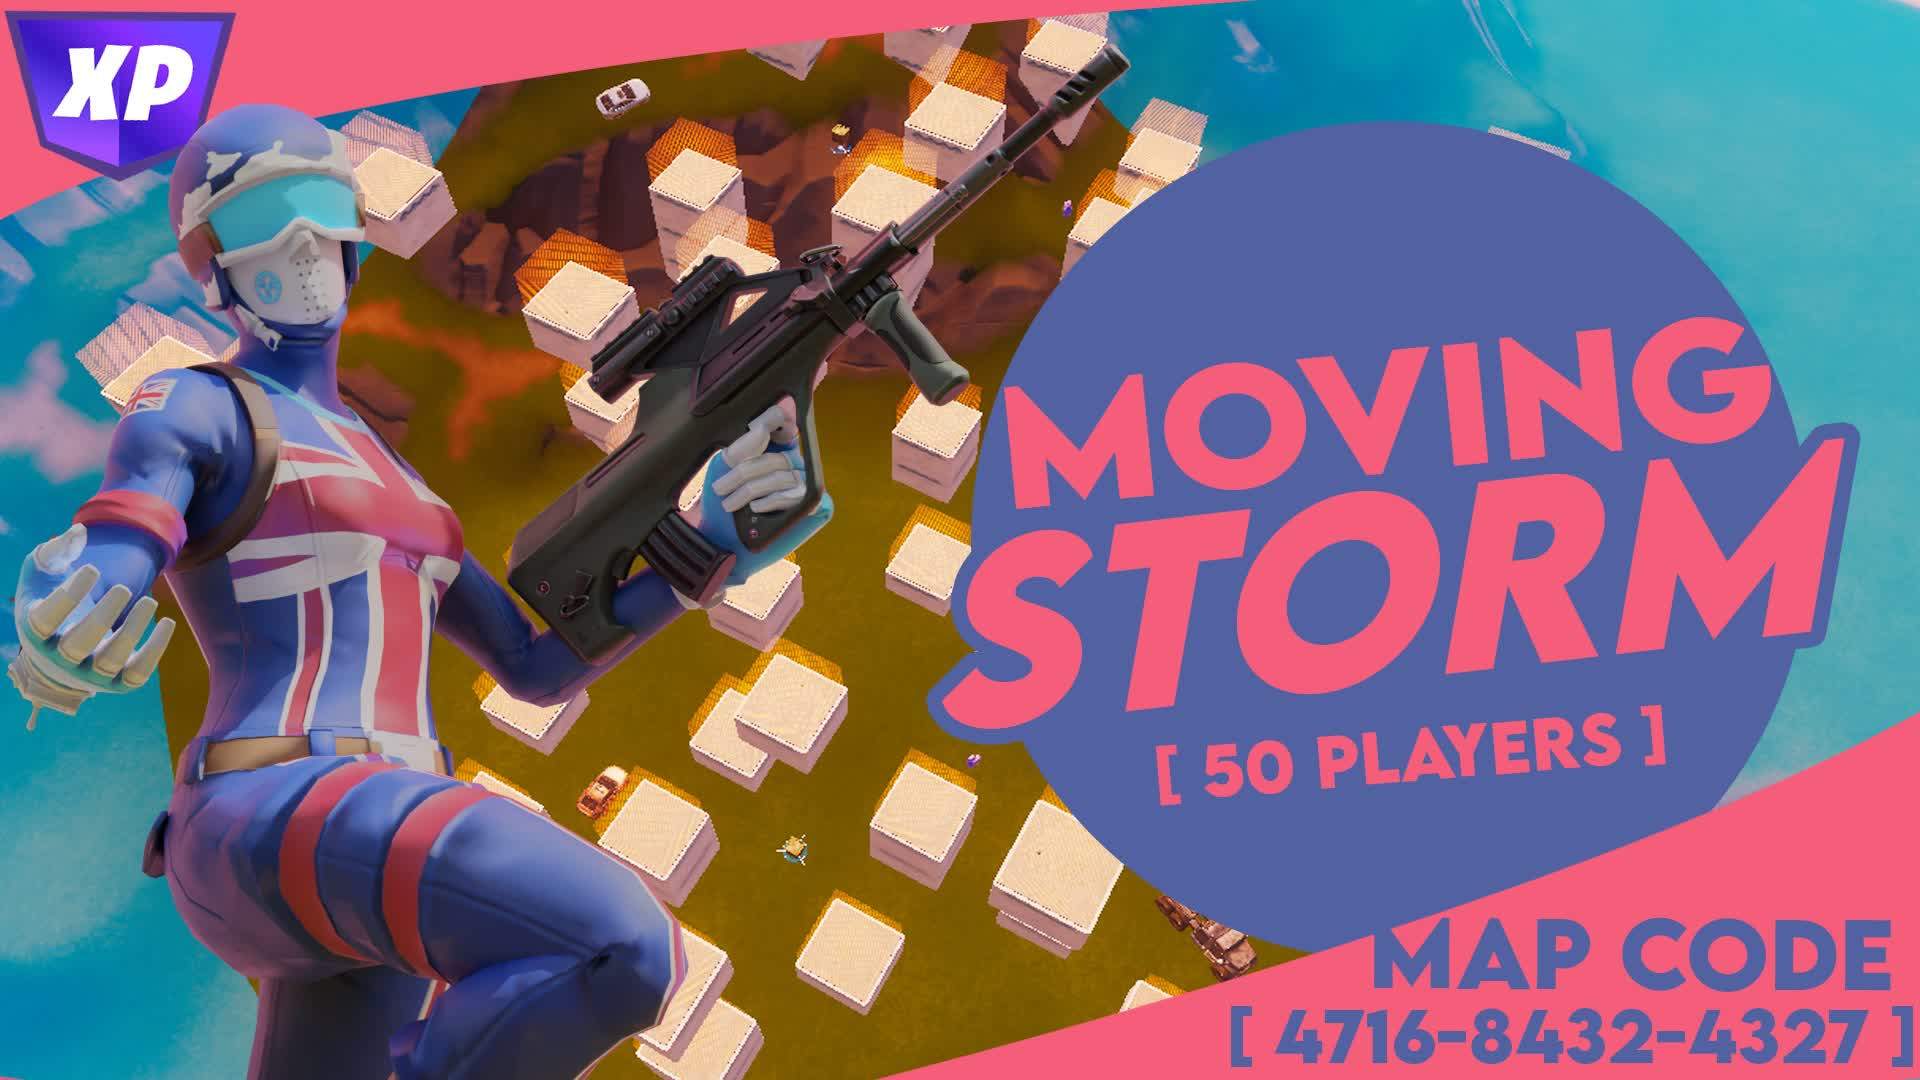 MOVING STORM [ 50 PLAYERS ]